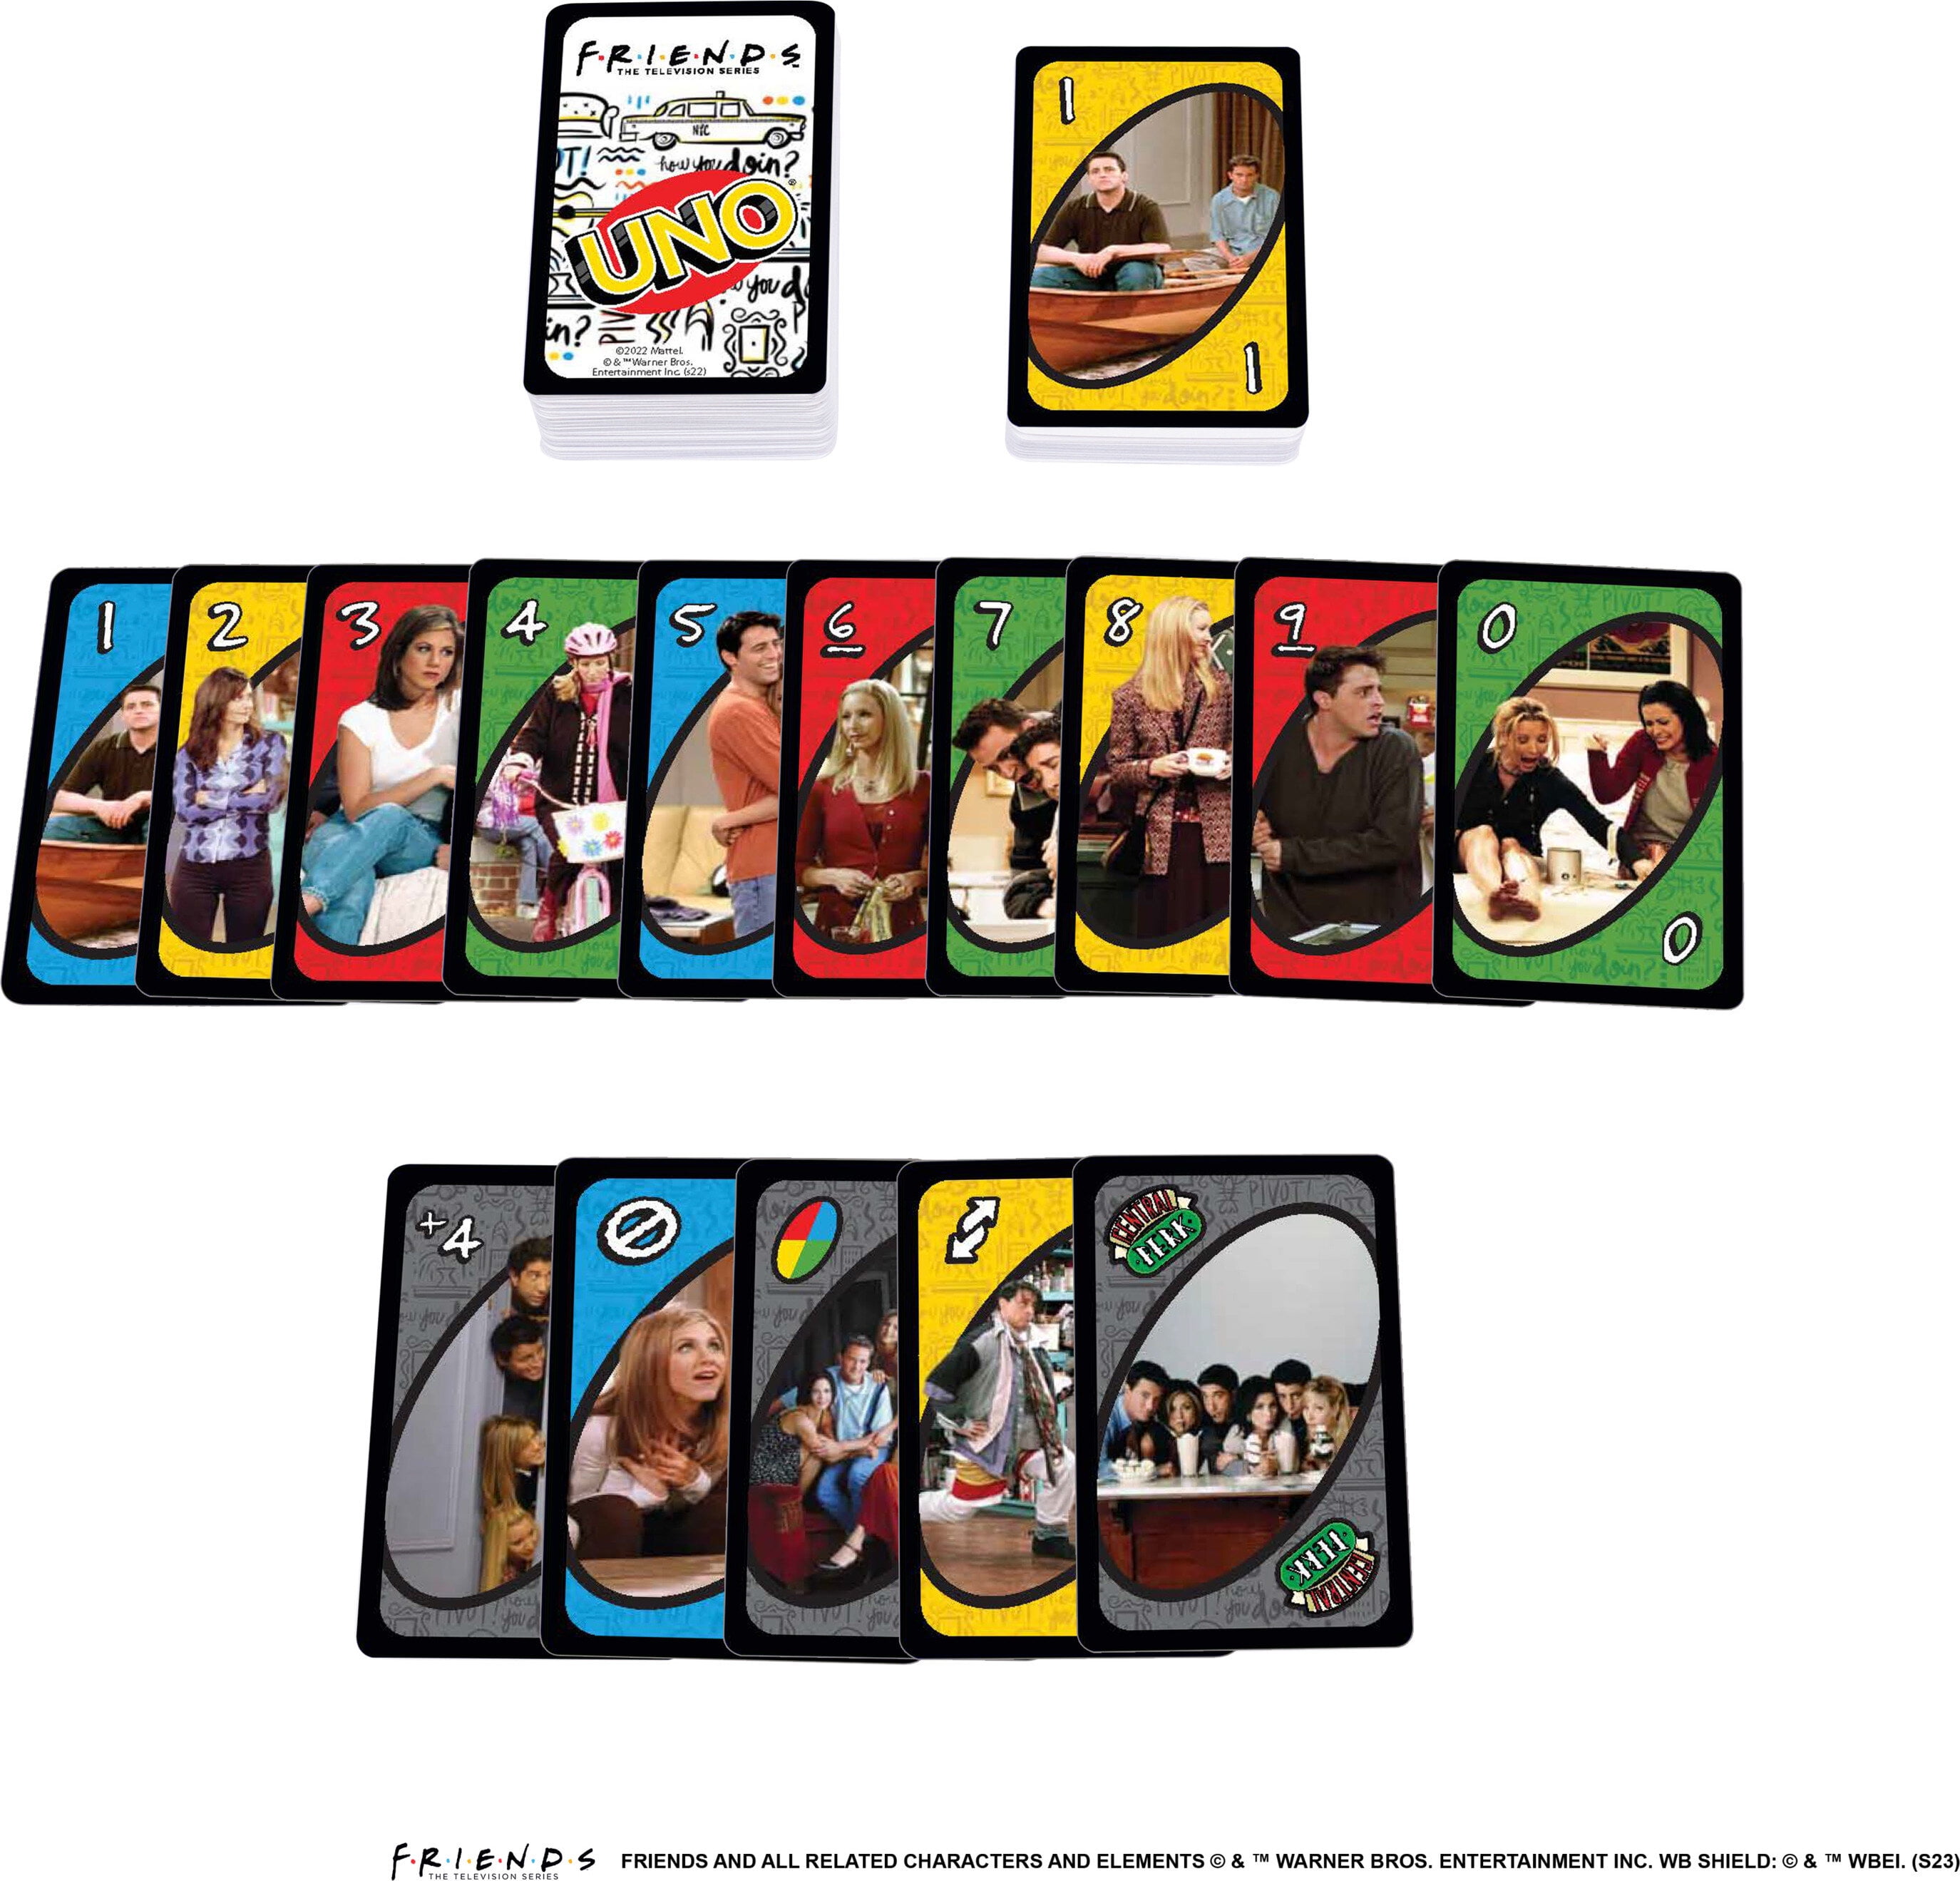 uno #games #friends  Kids game night, Uno card game, Card games